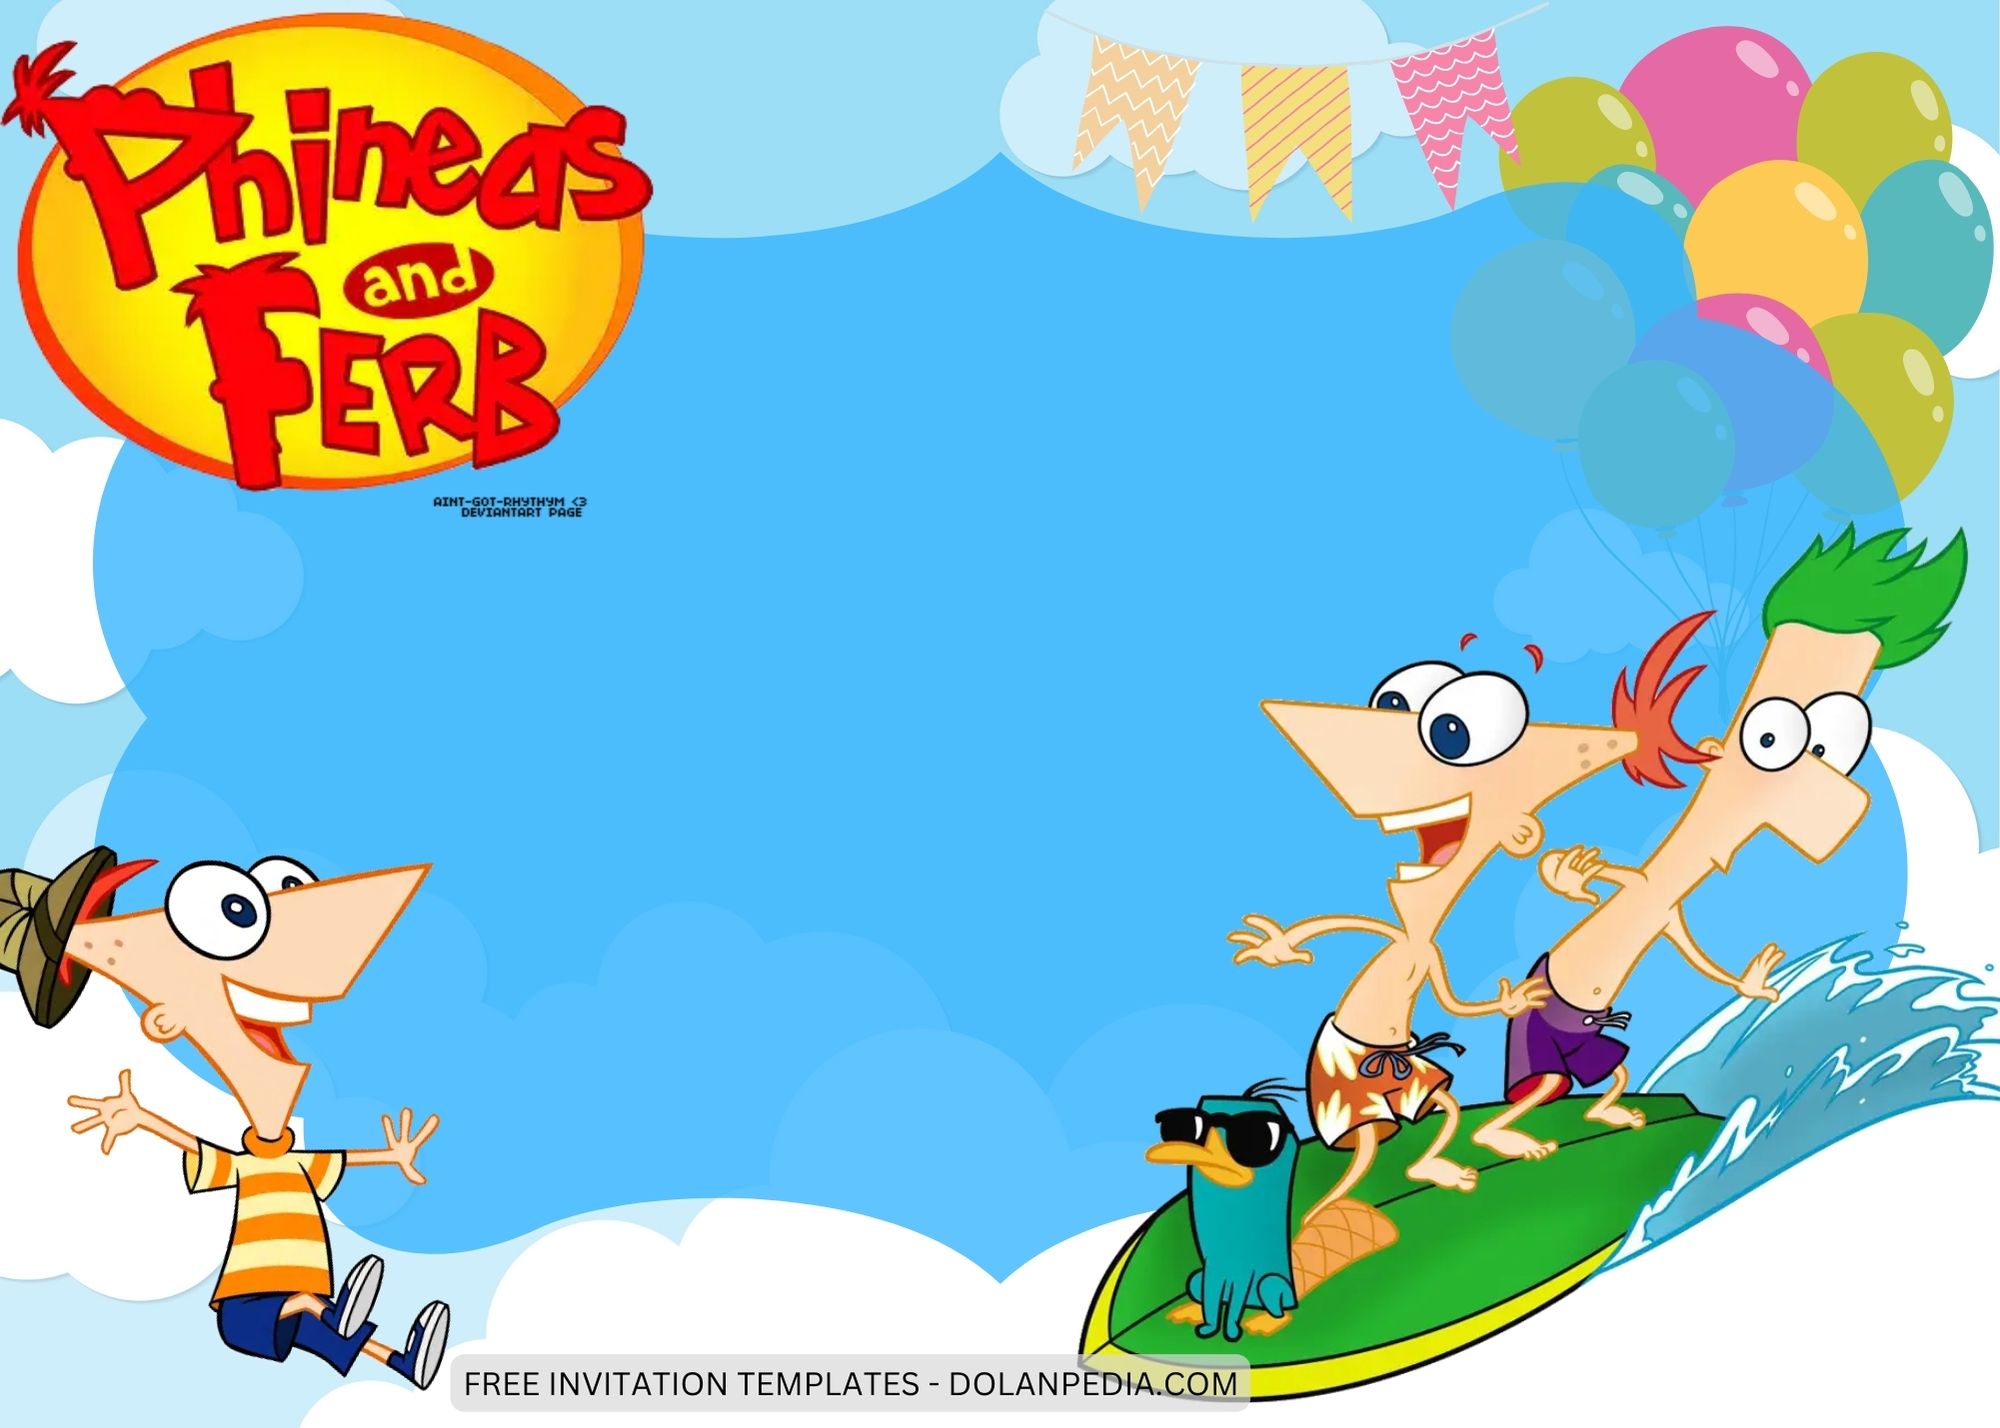 Blank Phineas and Ferb Birthday Invitation Templates Four